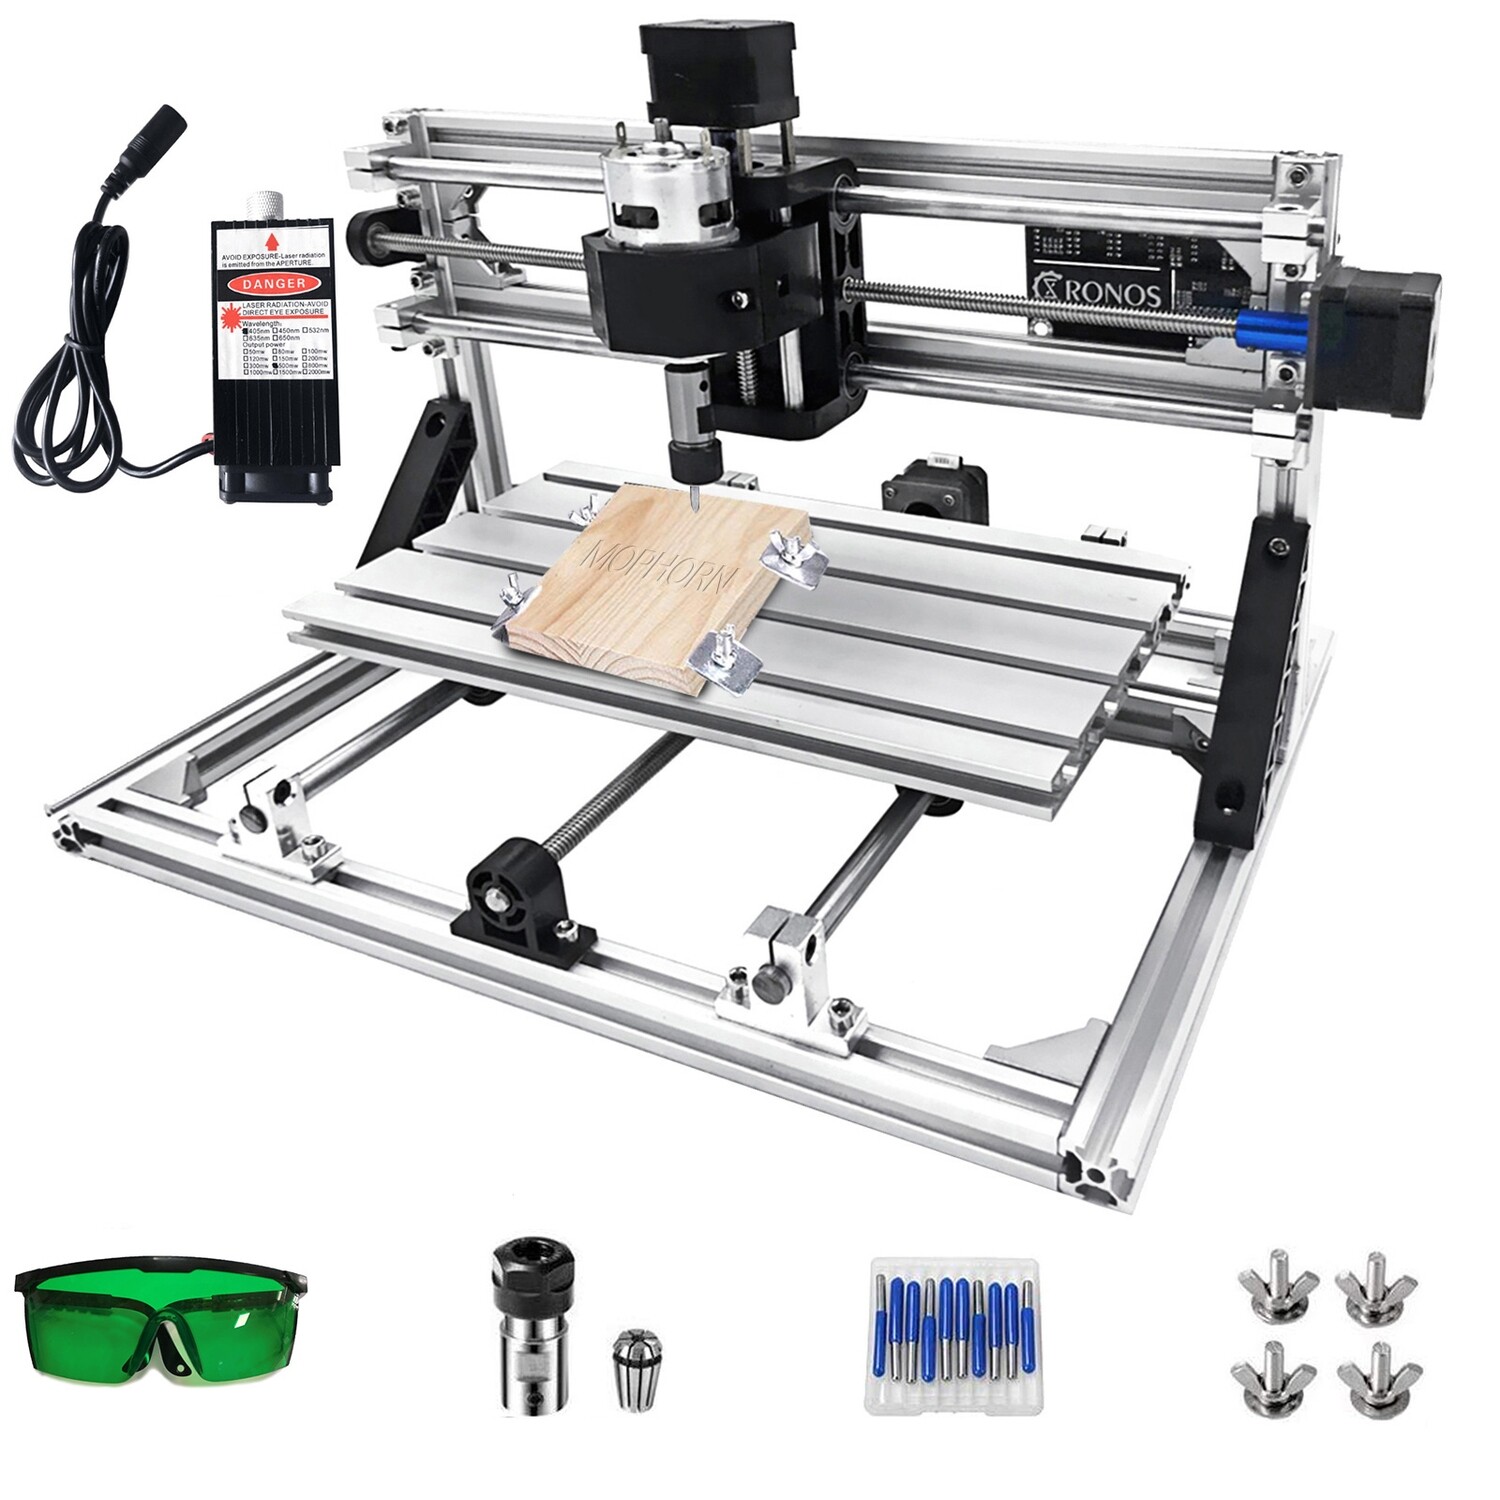 CNC 3018 Router Kit With Laser Engraver Grbl Injection Laser Engraver, Size: 500mw